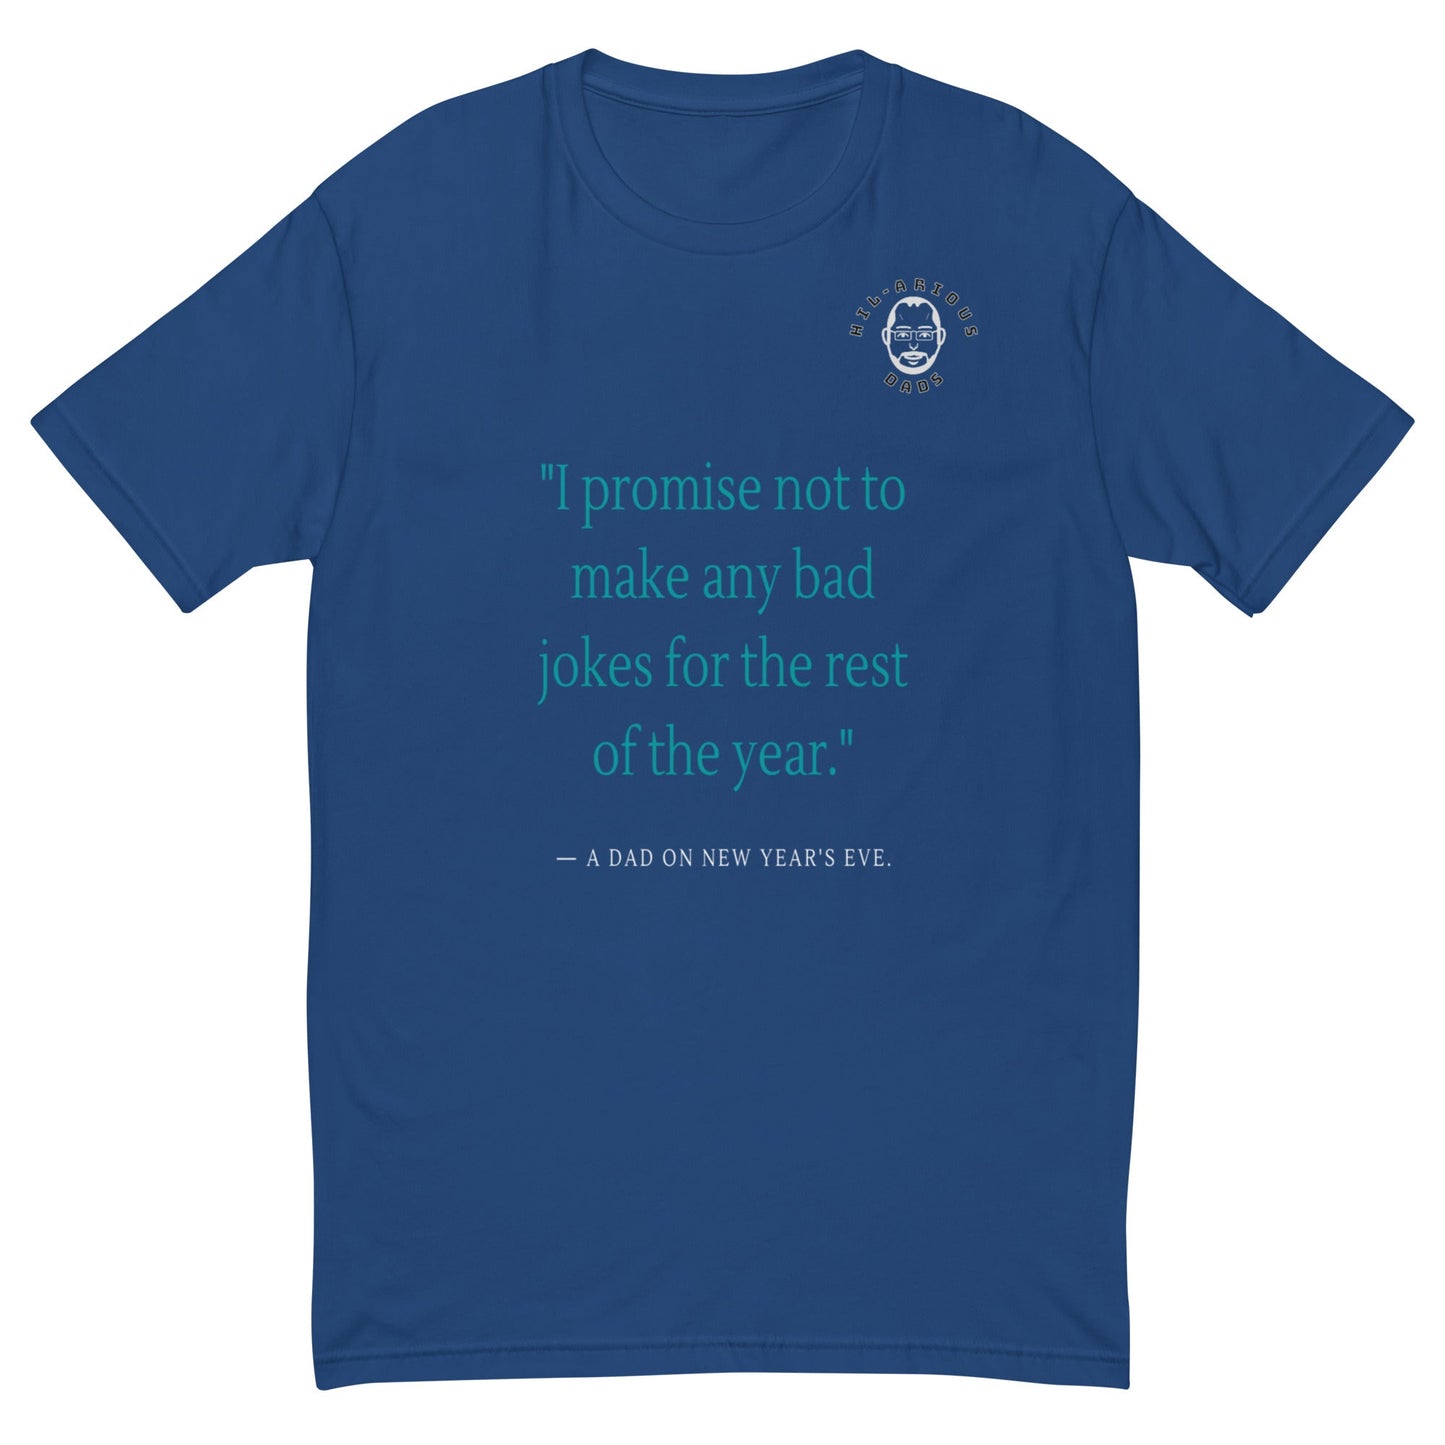 A dad's promise on New Year's Eve-T-shirt - Hil-arious Dads